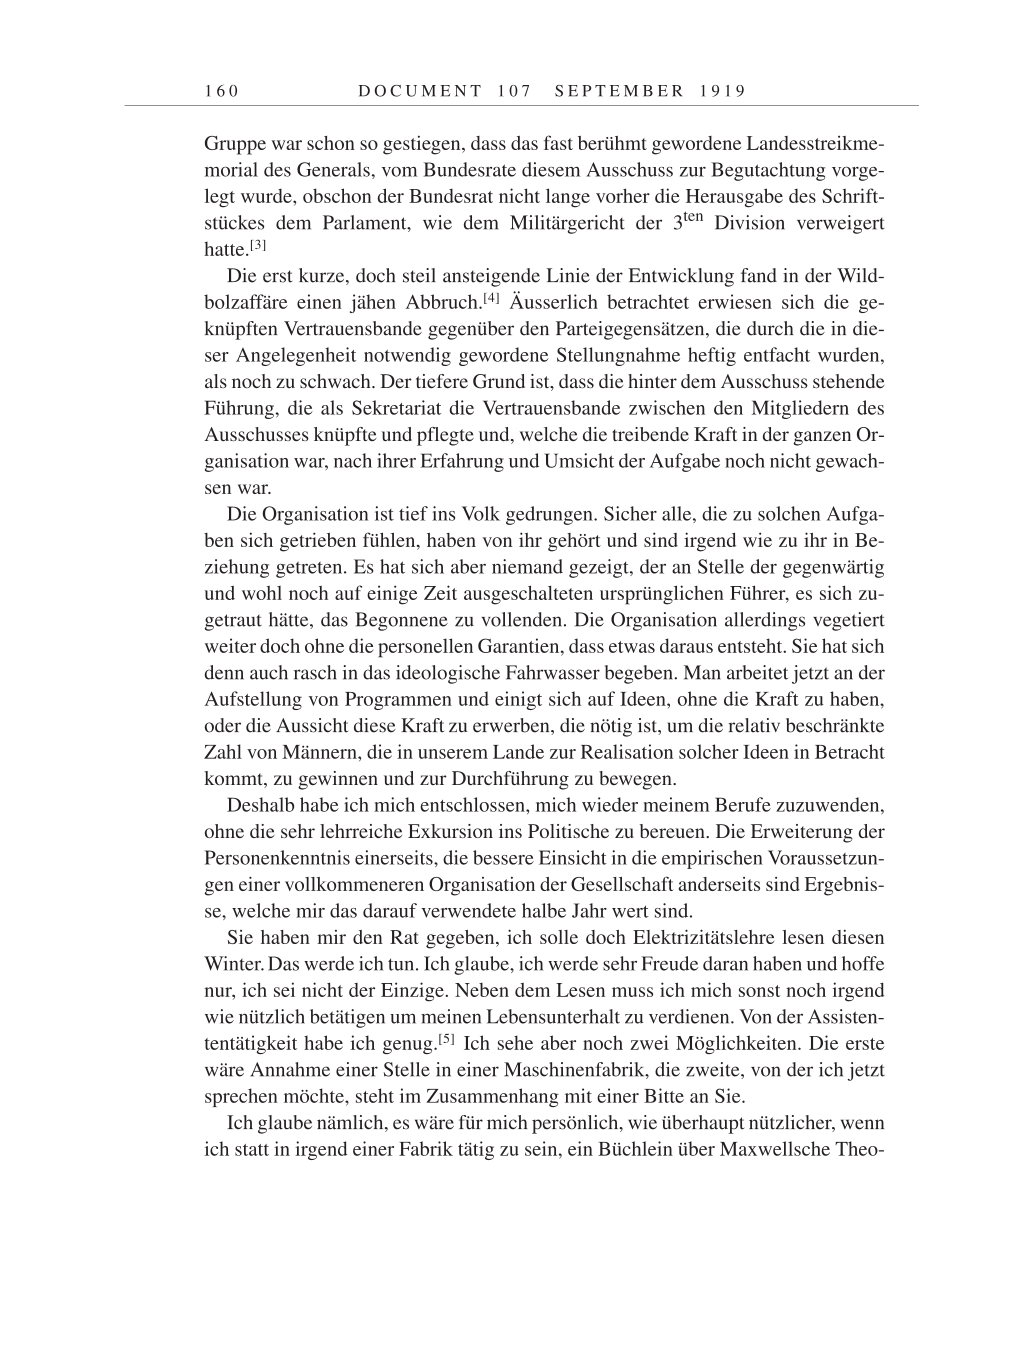 Volume 9: The Berlin Years: Correspondence January 1919-April 1920 page 160